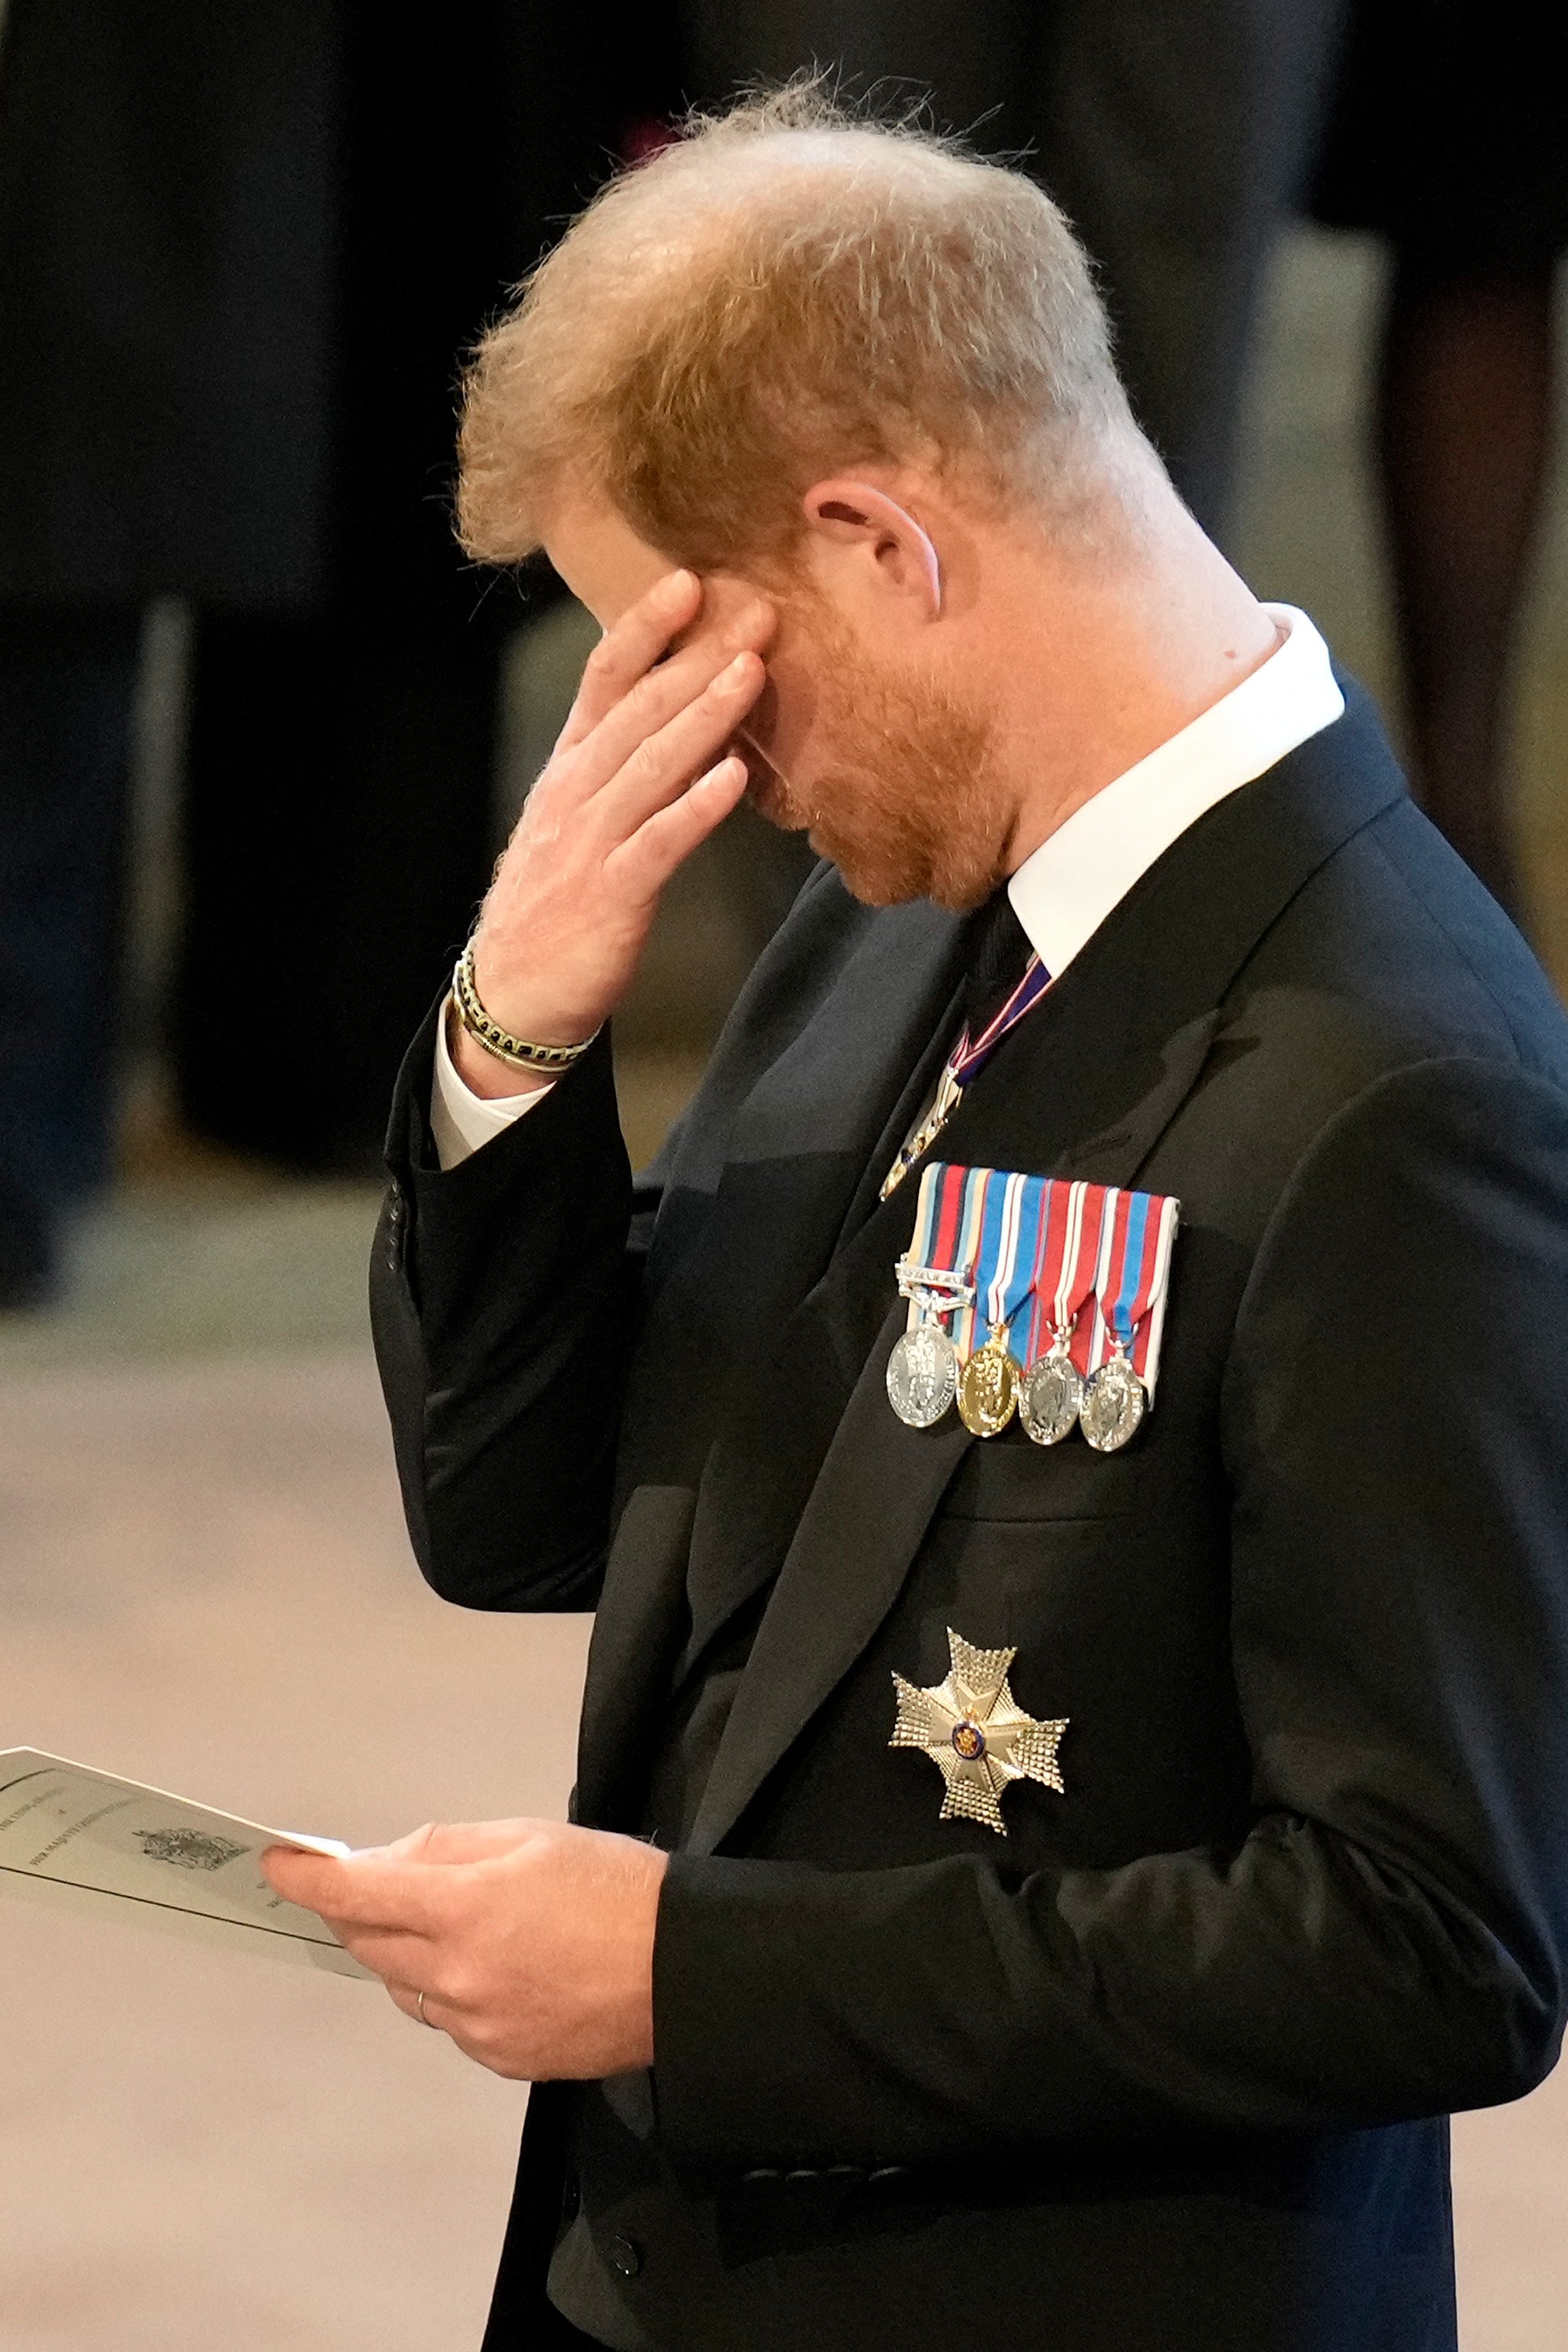 Britain's Prince Harry, Duke of Sussex attends a service for the reception of Queen Elizabeth II's coffin inside Westminster Hall in London on September 14, 2022. | Source: Getty Images